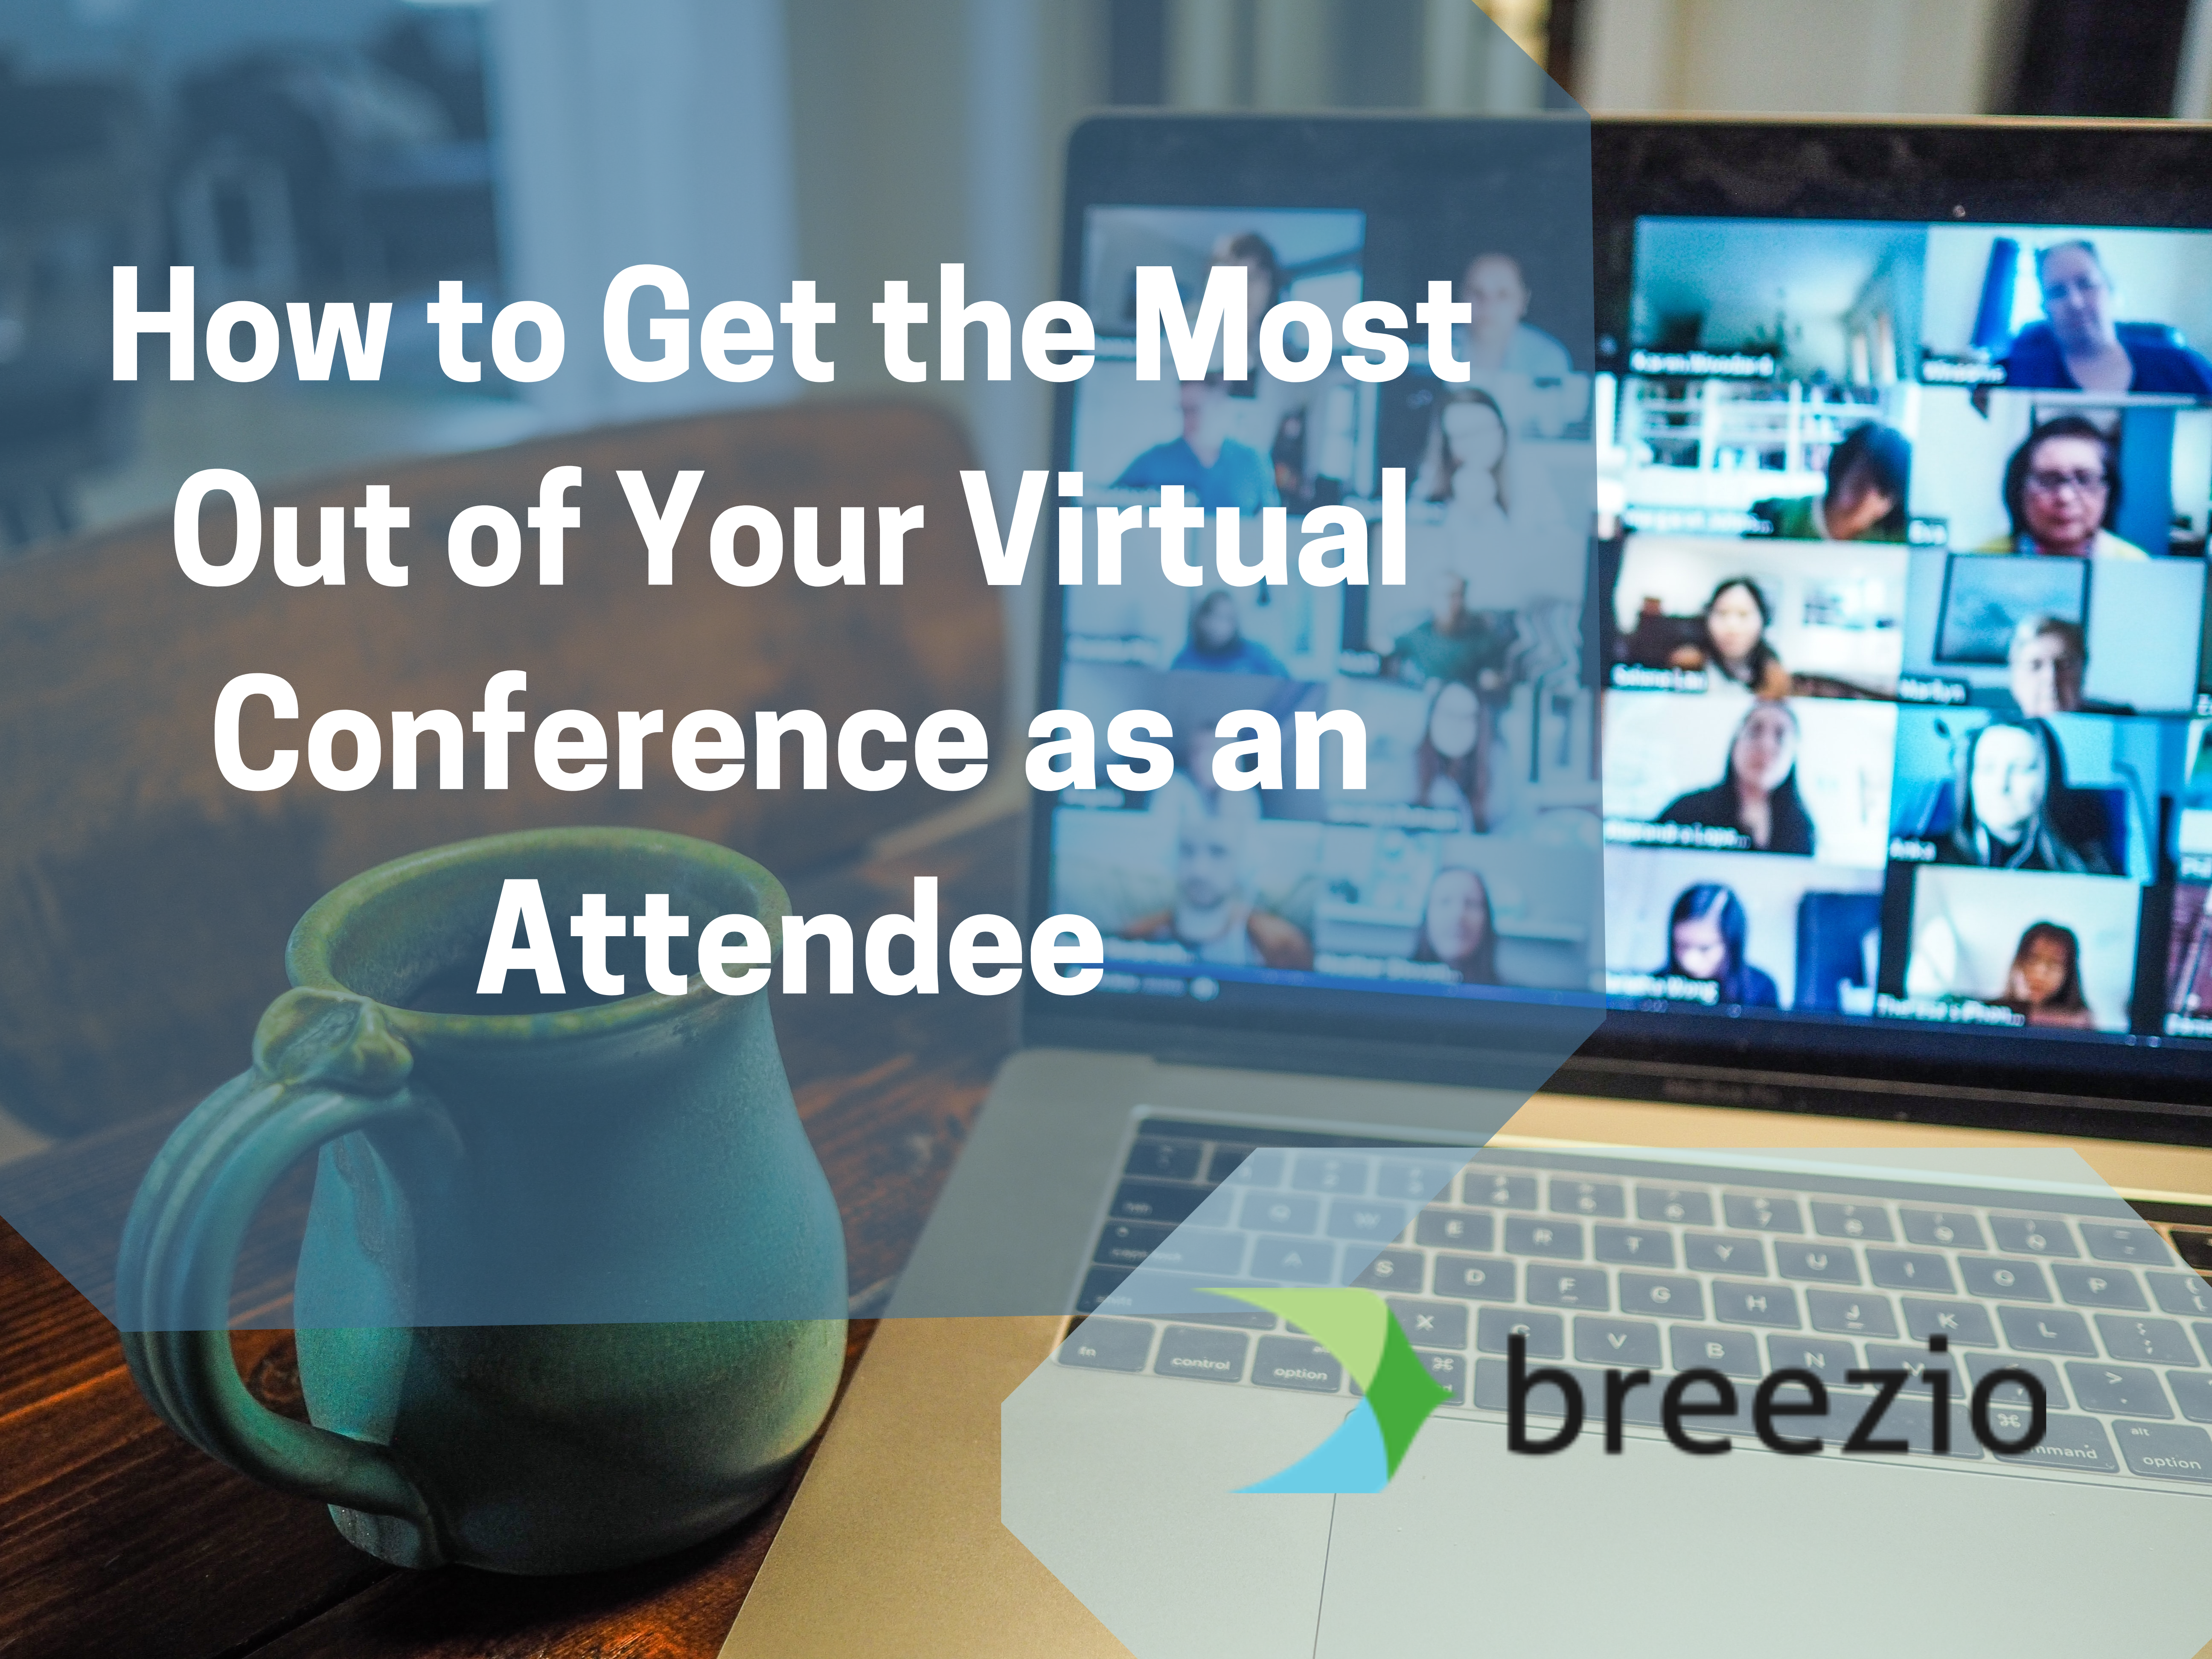 How to Get the Most Out of Your Virtual Conference as an Attendee